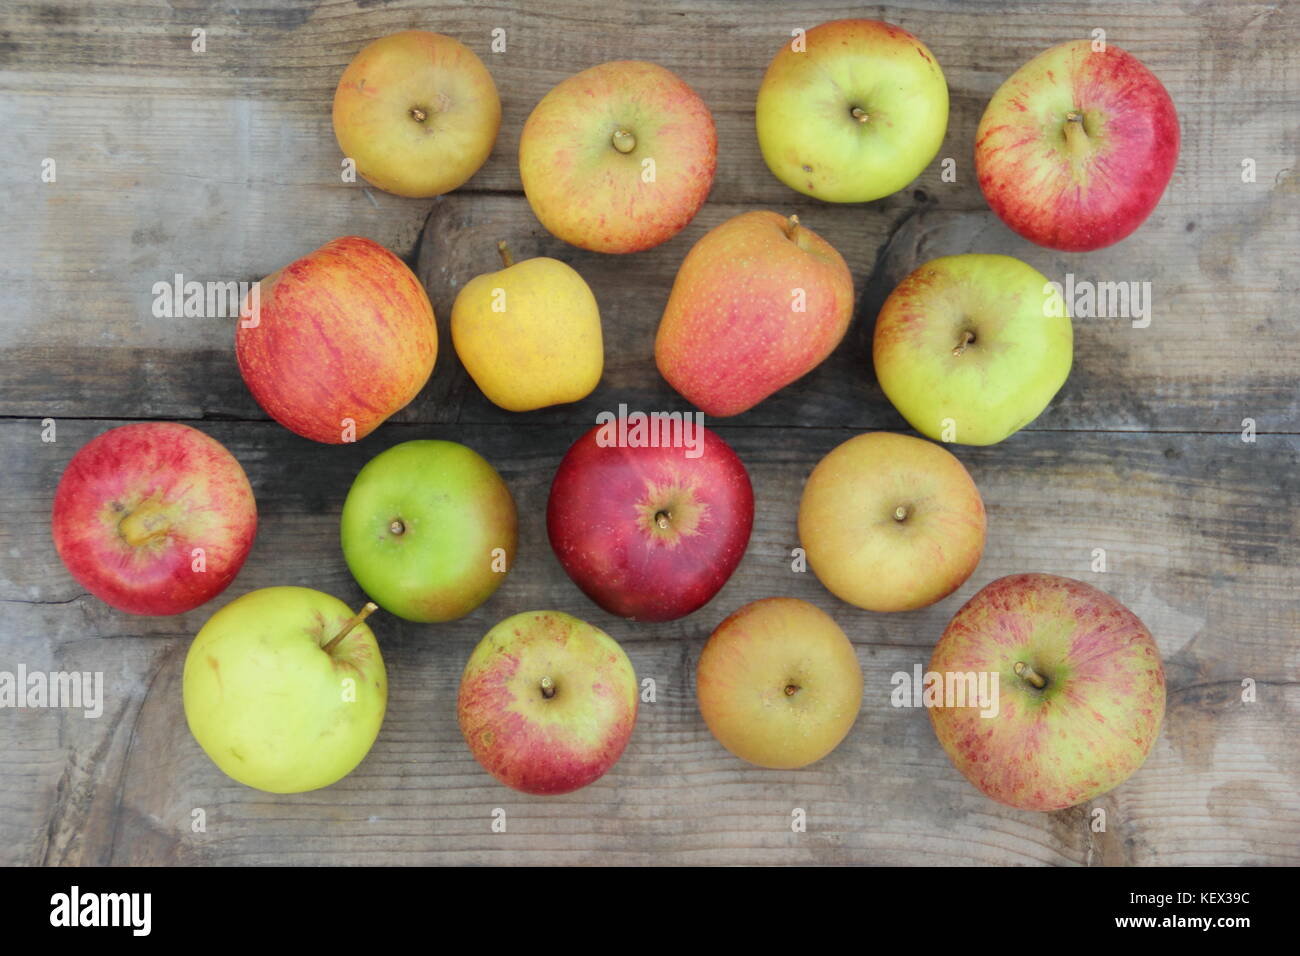 Freshly harvested English apples (malus domestica) including heritage varieties Pitmaston Pineapple, Worcester Pearmain and Lamb's Seedling, autumn UK Stock Photo